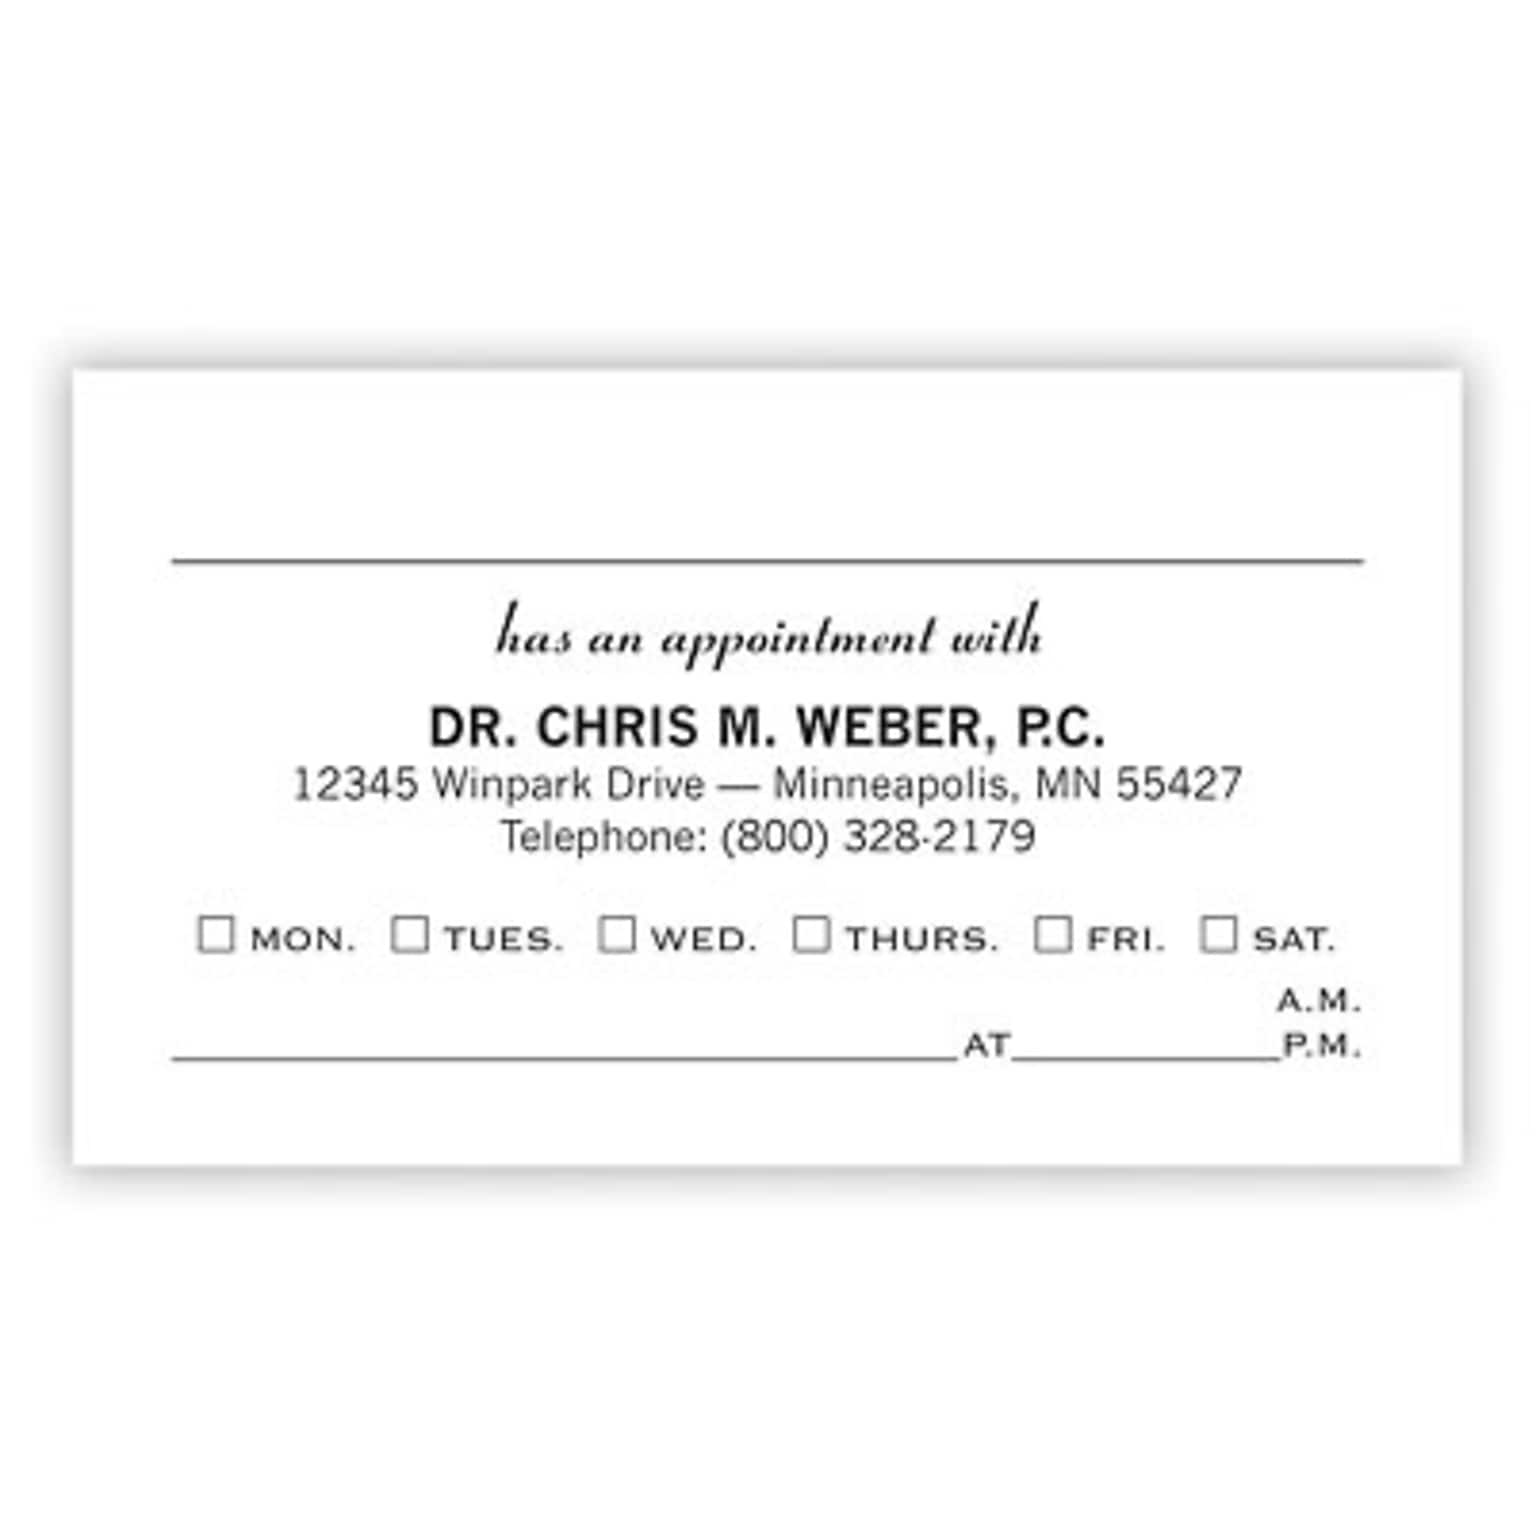 Custom 1-2 Color Appointment Cards, CLASSIC CREST® Baronial Ivory 80#, Raised Print, 1 Standard & 1 Custom Inks, 2-Sided, 250/Pk